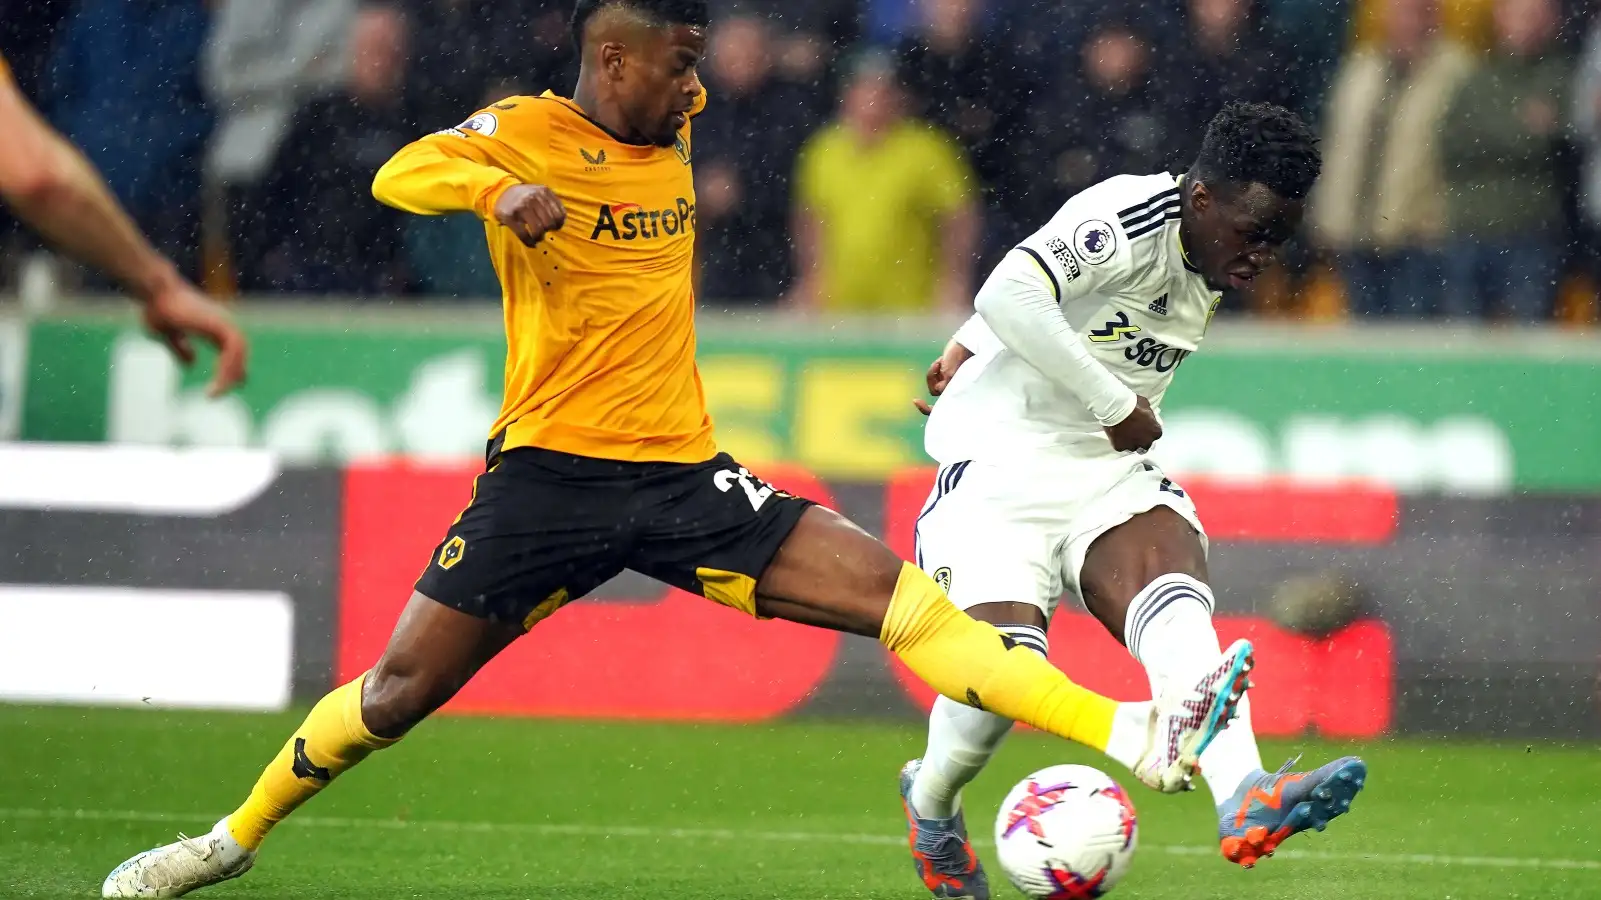 Leeds winger Wilfried Gnonto takes on the Wolves defence.